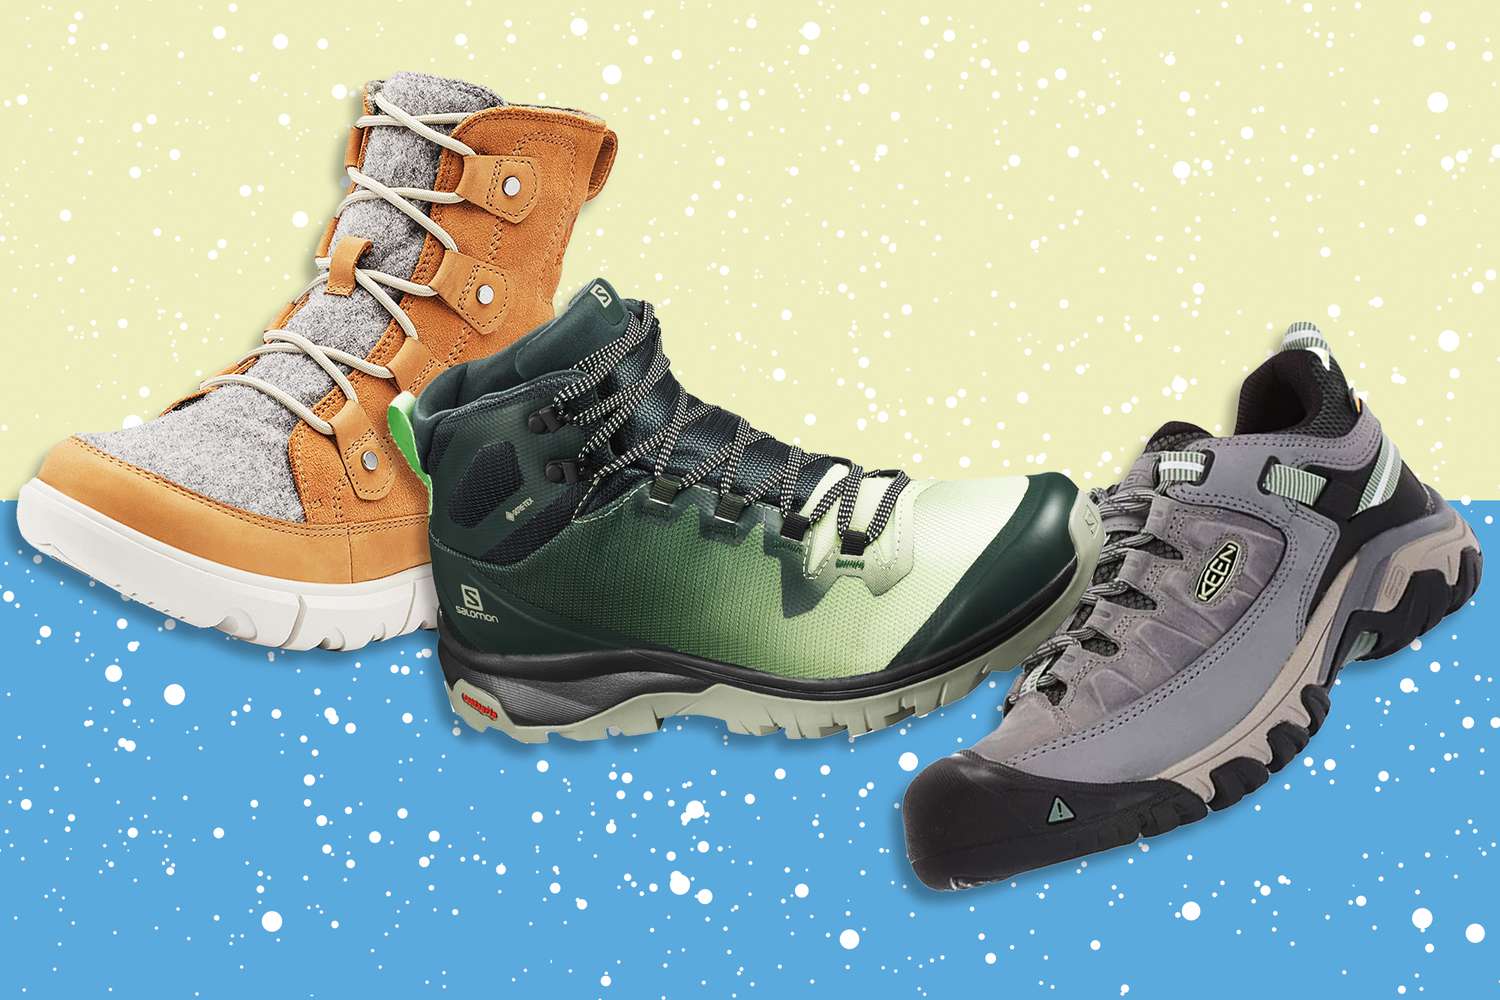 Suspect Roasted Arrow 4 of the Best Boots for Winter Walking, According to Thousands of Reviews |  EatingWell